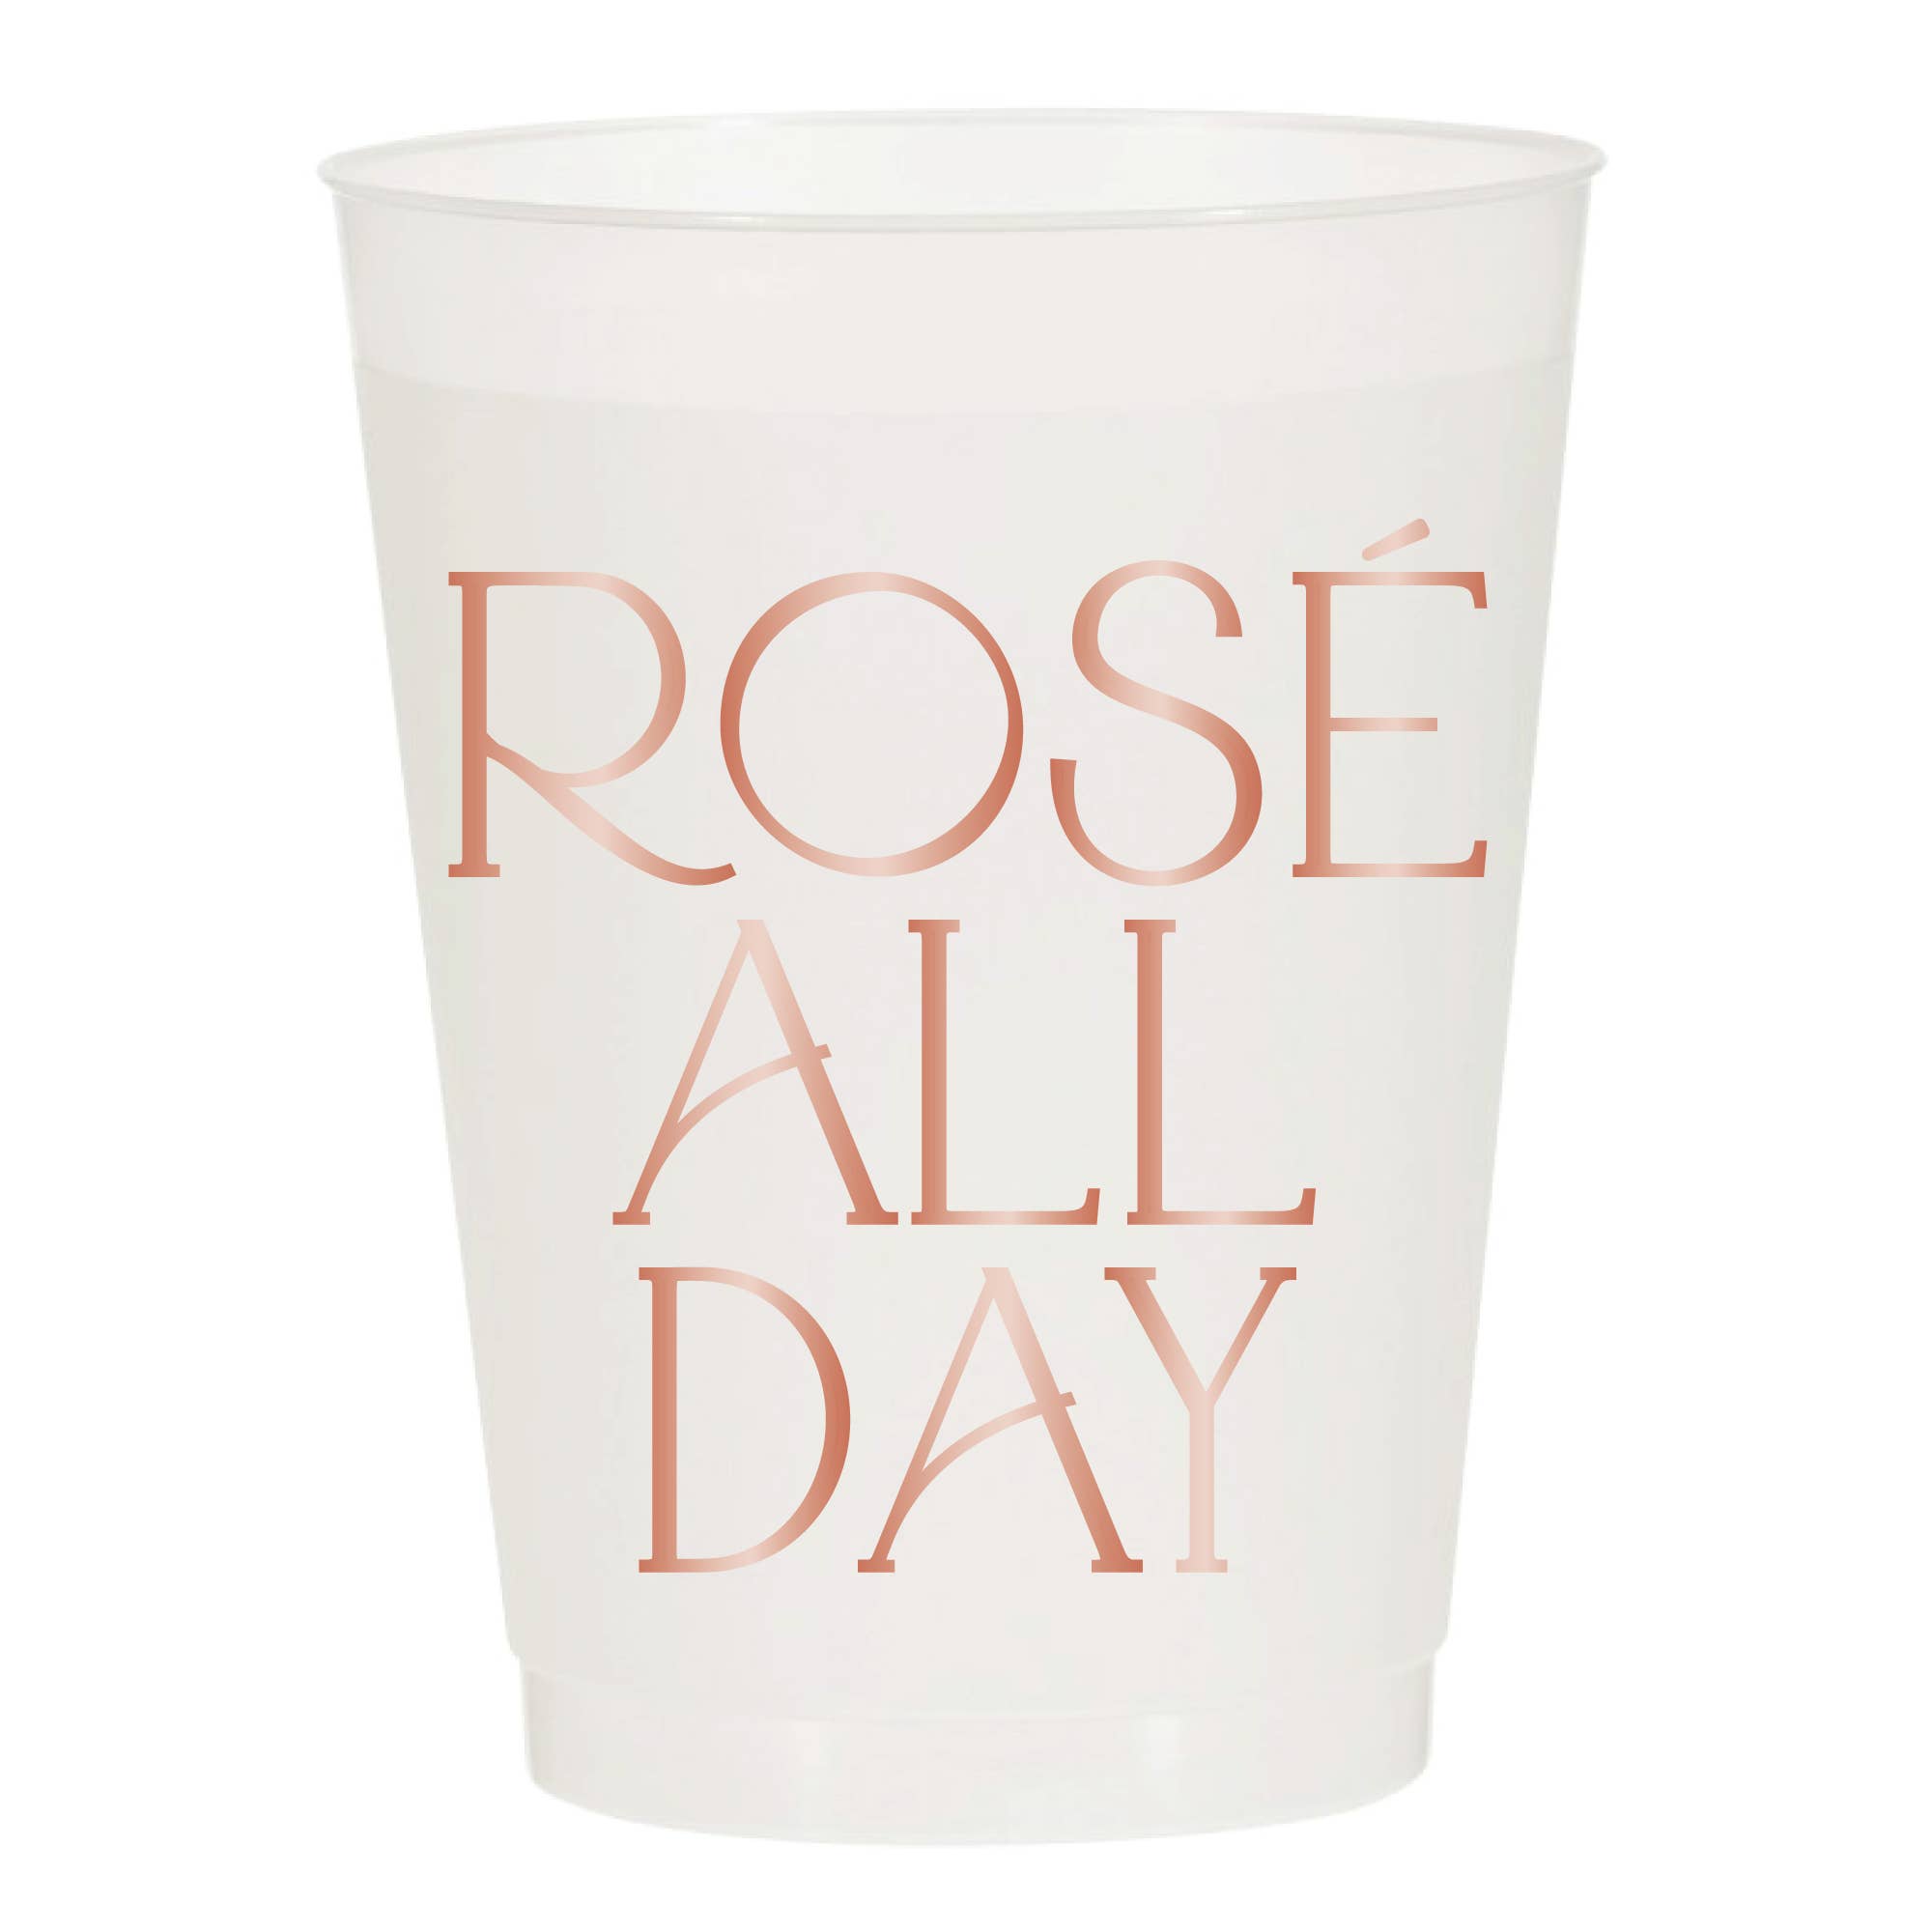 Rosé All Day 16oz Reusable Cups Summer Vaca - Set of 10 Cups